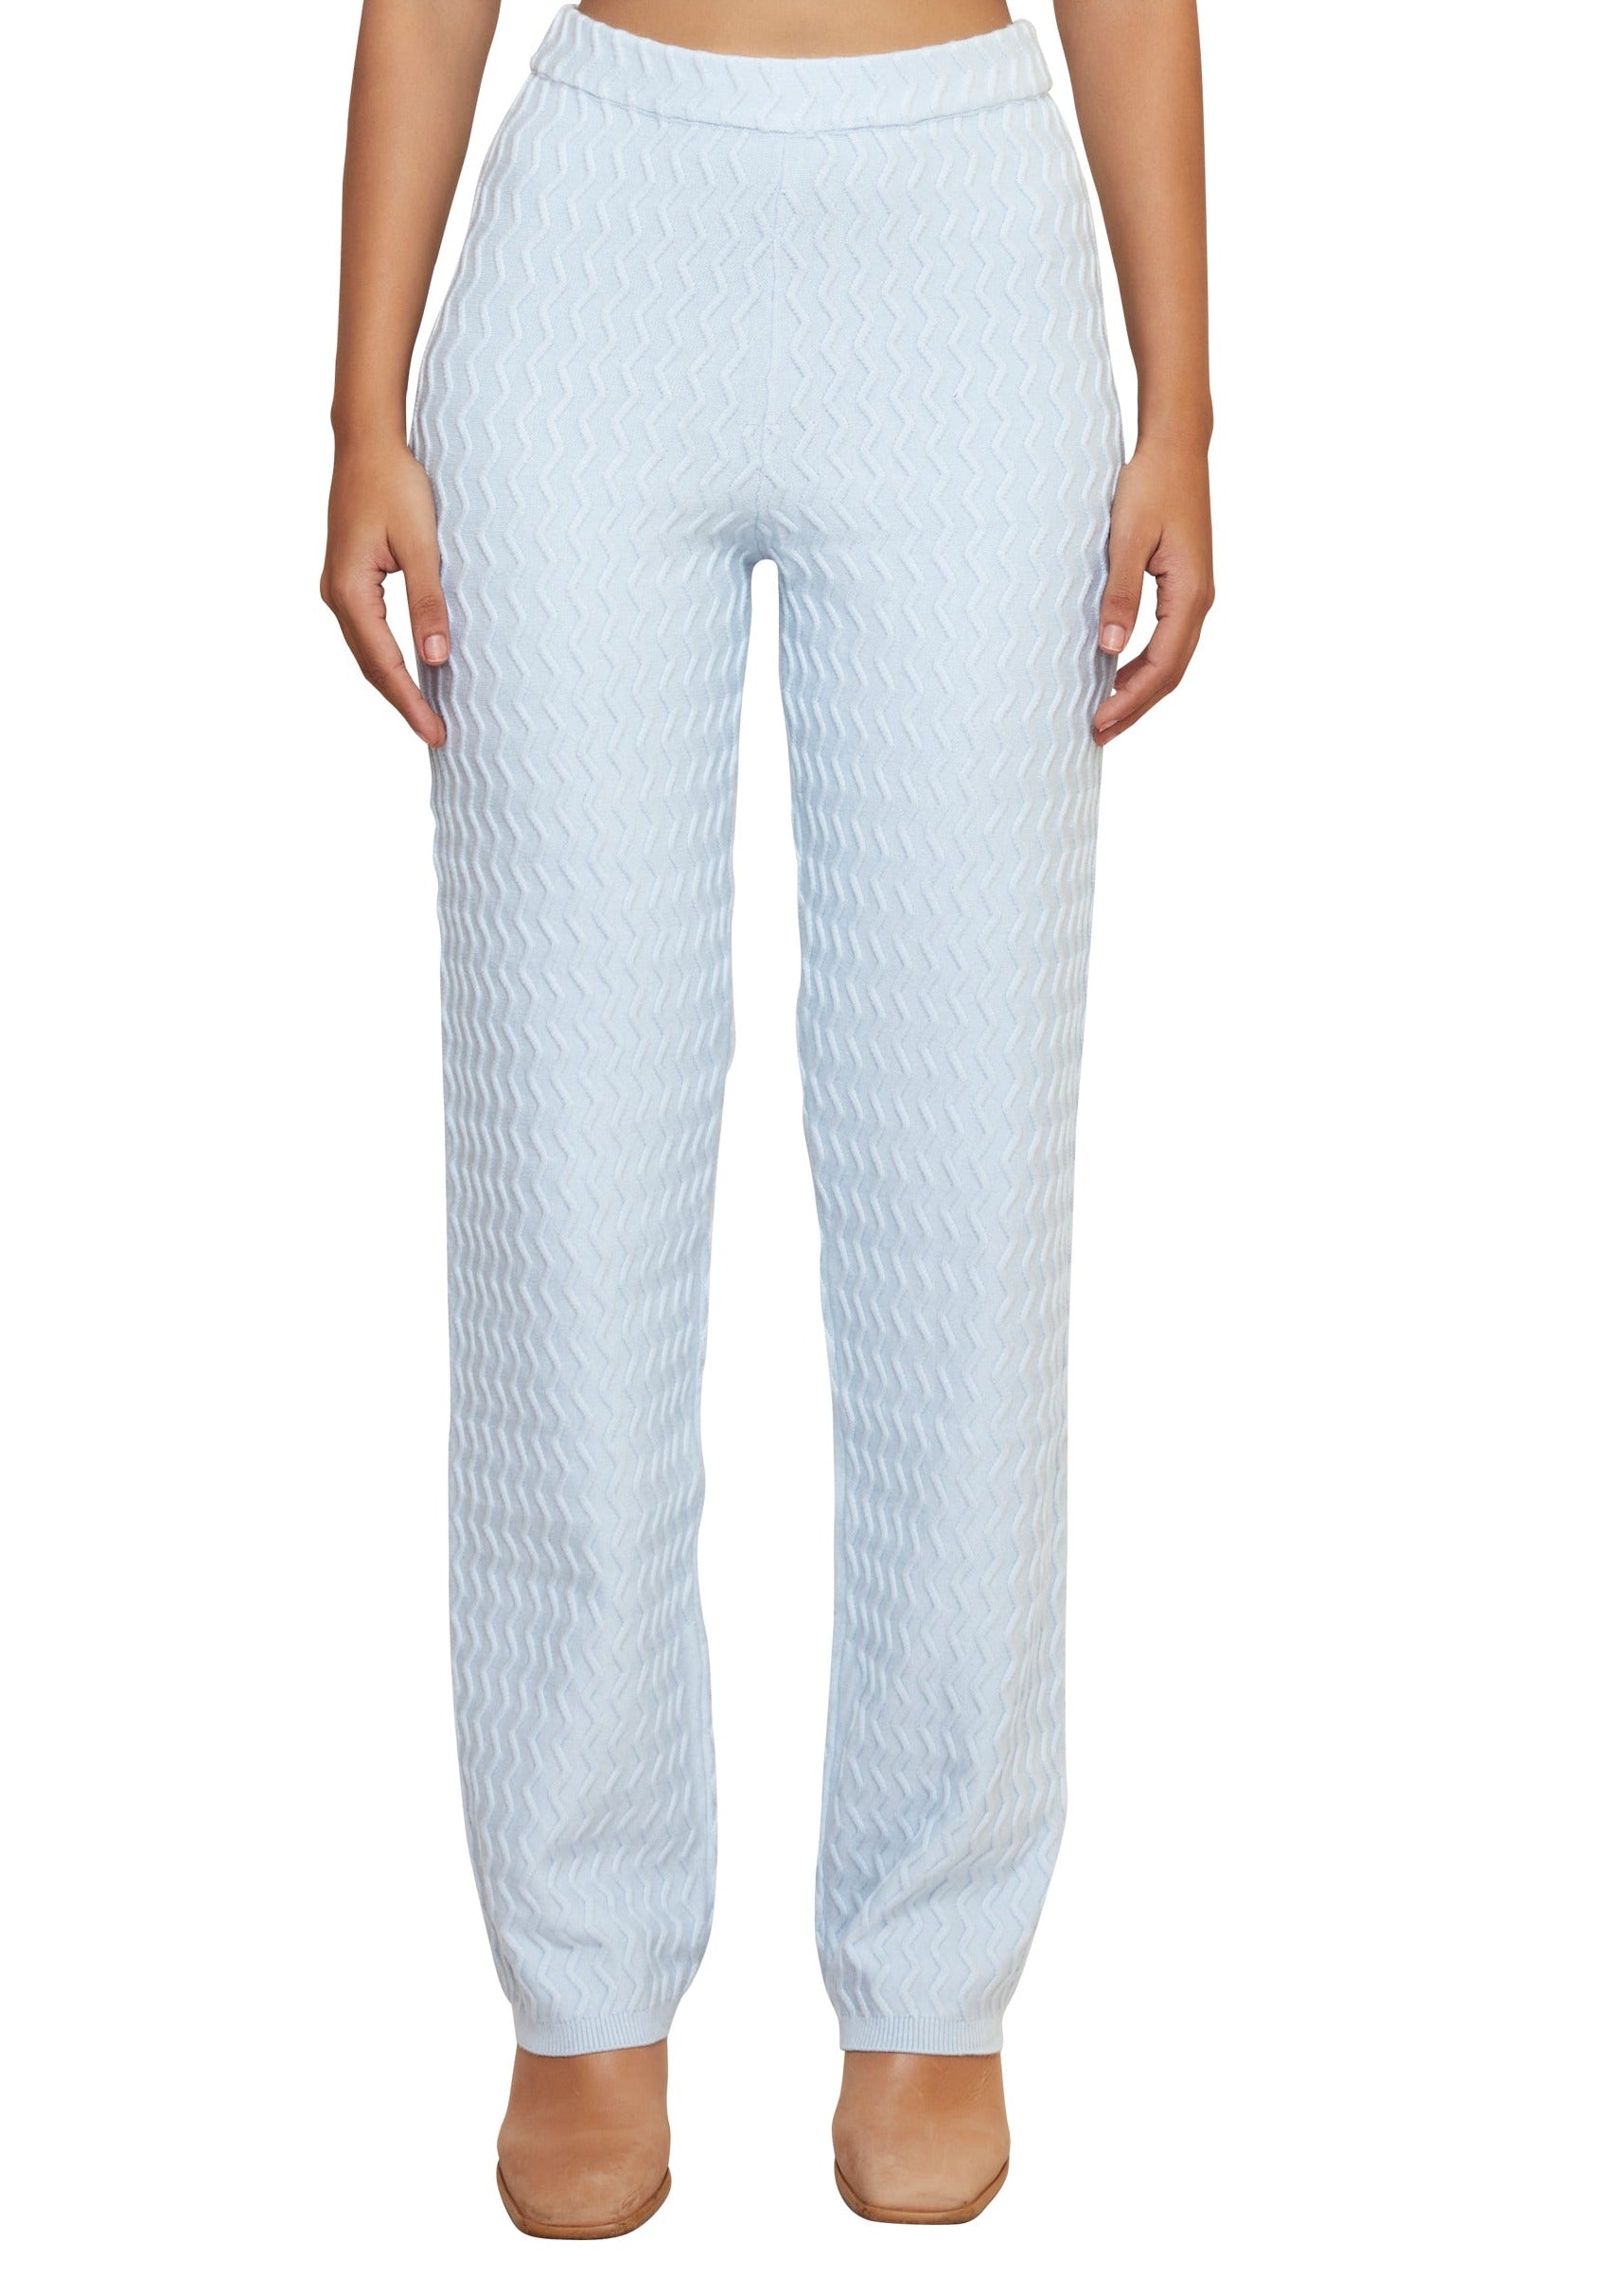 Blue Straight leg Wavy rib pants with Elastic waist from the brand House Of Sunny